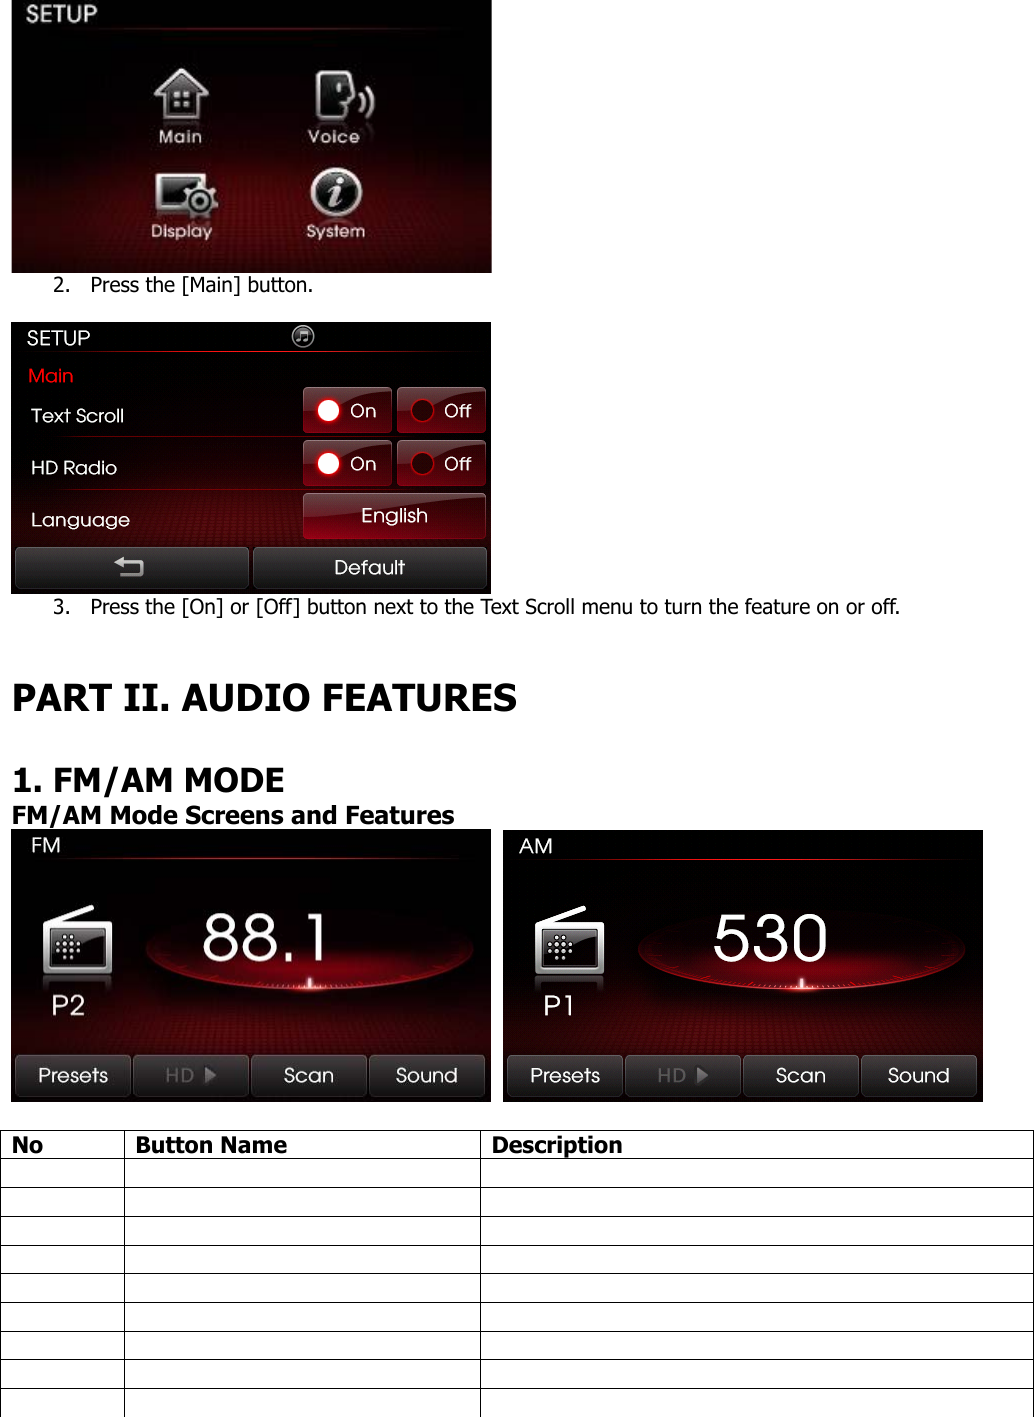  2. Press the [Main] button.   3. Press the [On] or [Off] button next to the Text Scroll menu to turn the feature on or off.     PART II. AUDIO FEATURES  1. FM/AM MODE FM/AM Mode Screens and Features     No Button Name  Description                                     